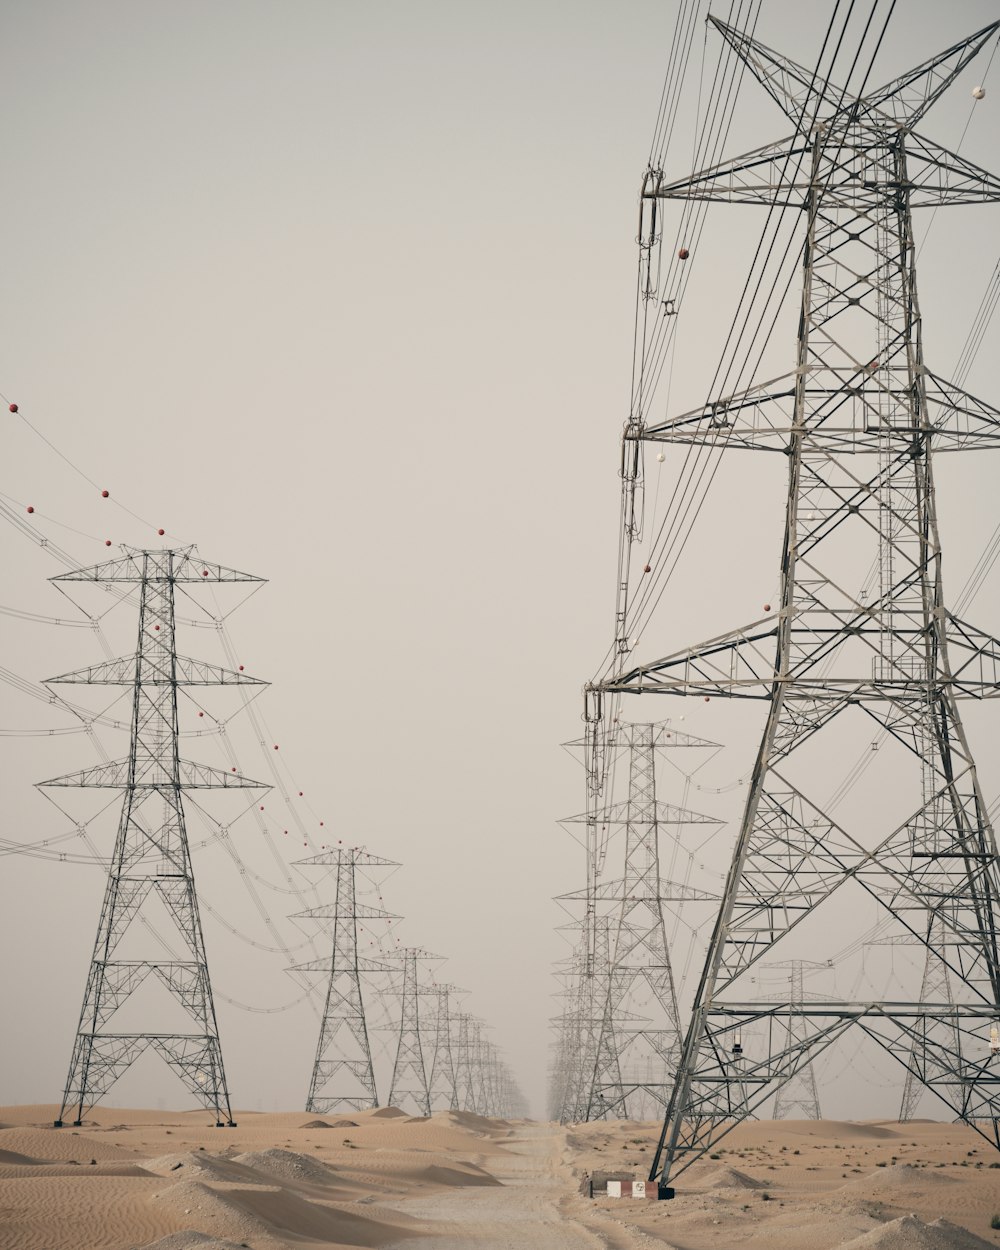 a group of power lines in the desert